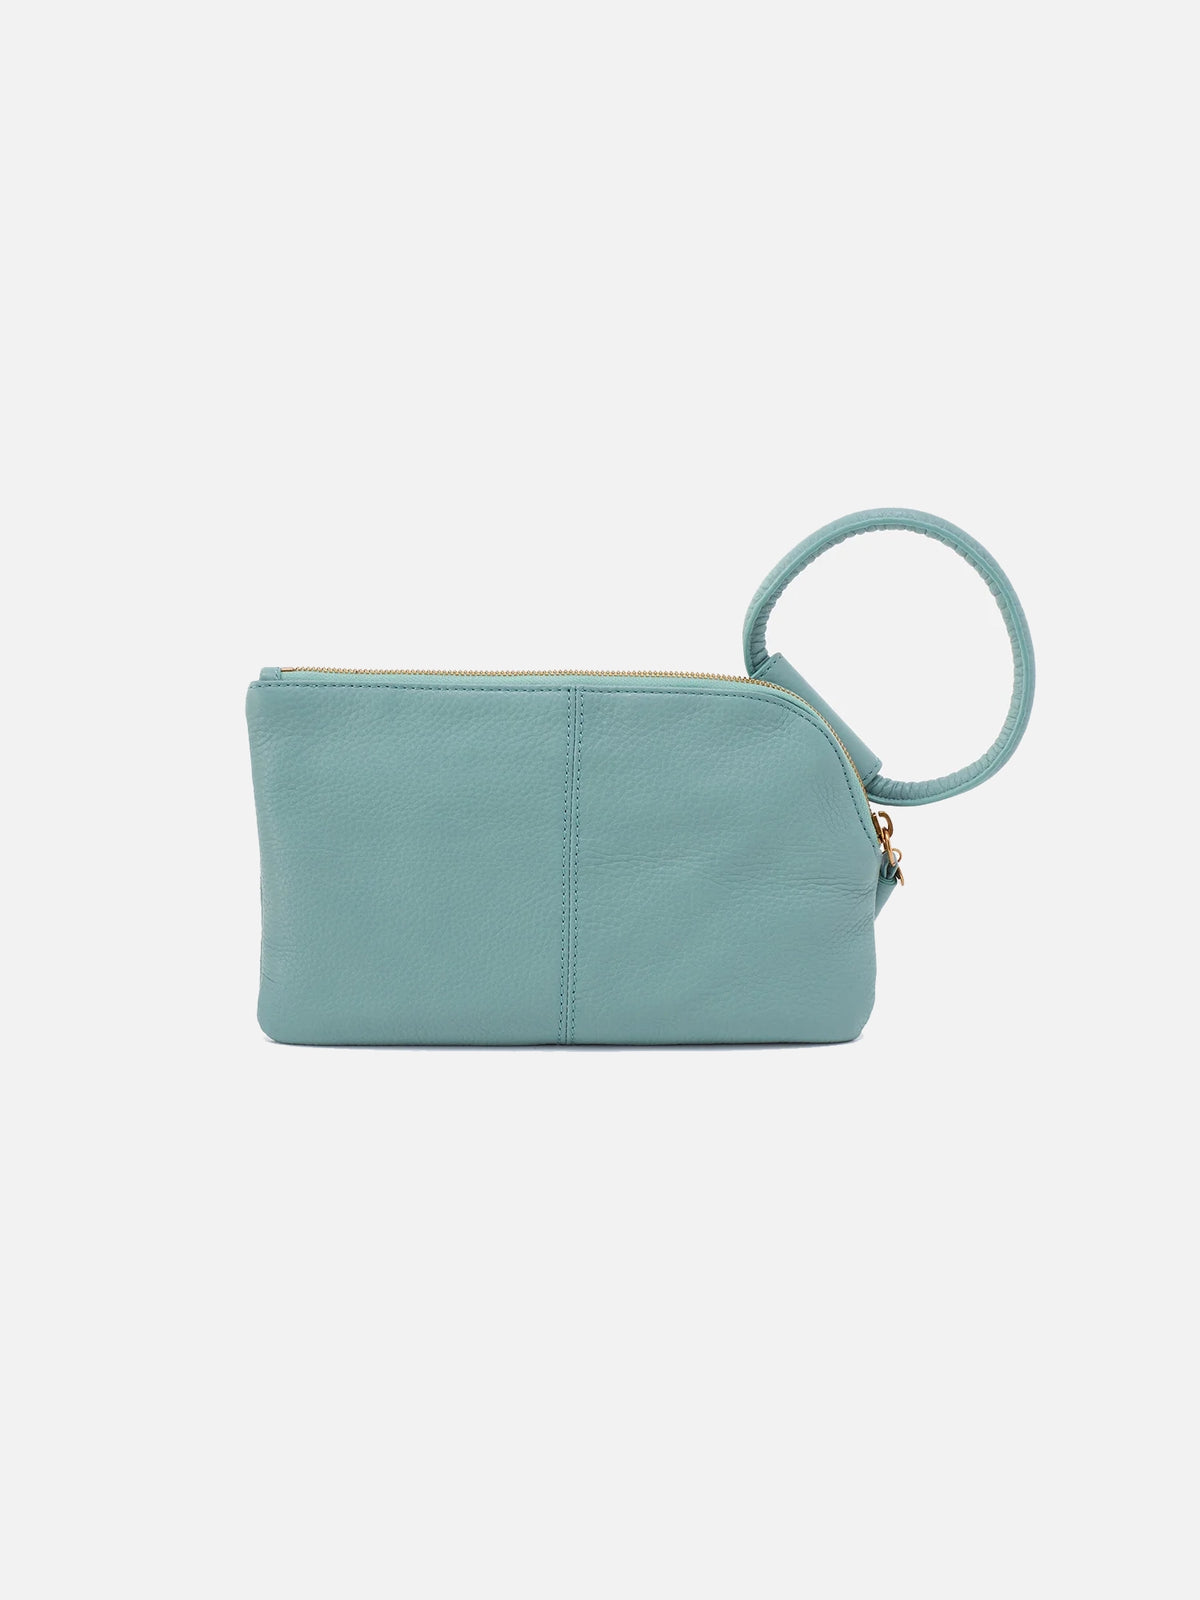 hobo sable wristlet in pale green pebbled leather